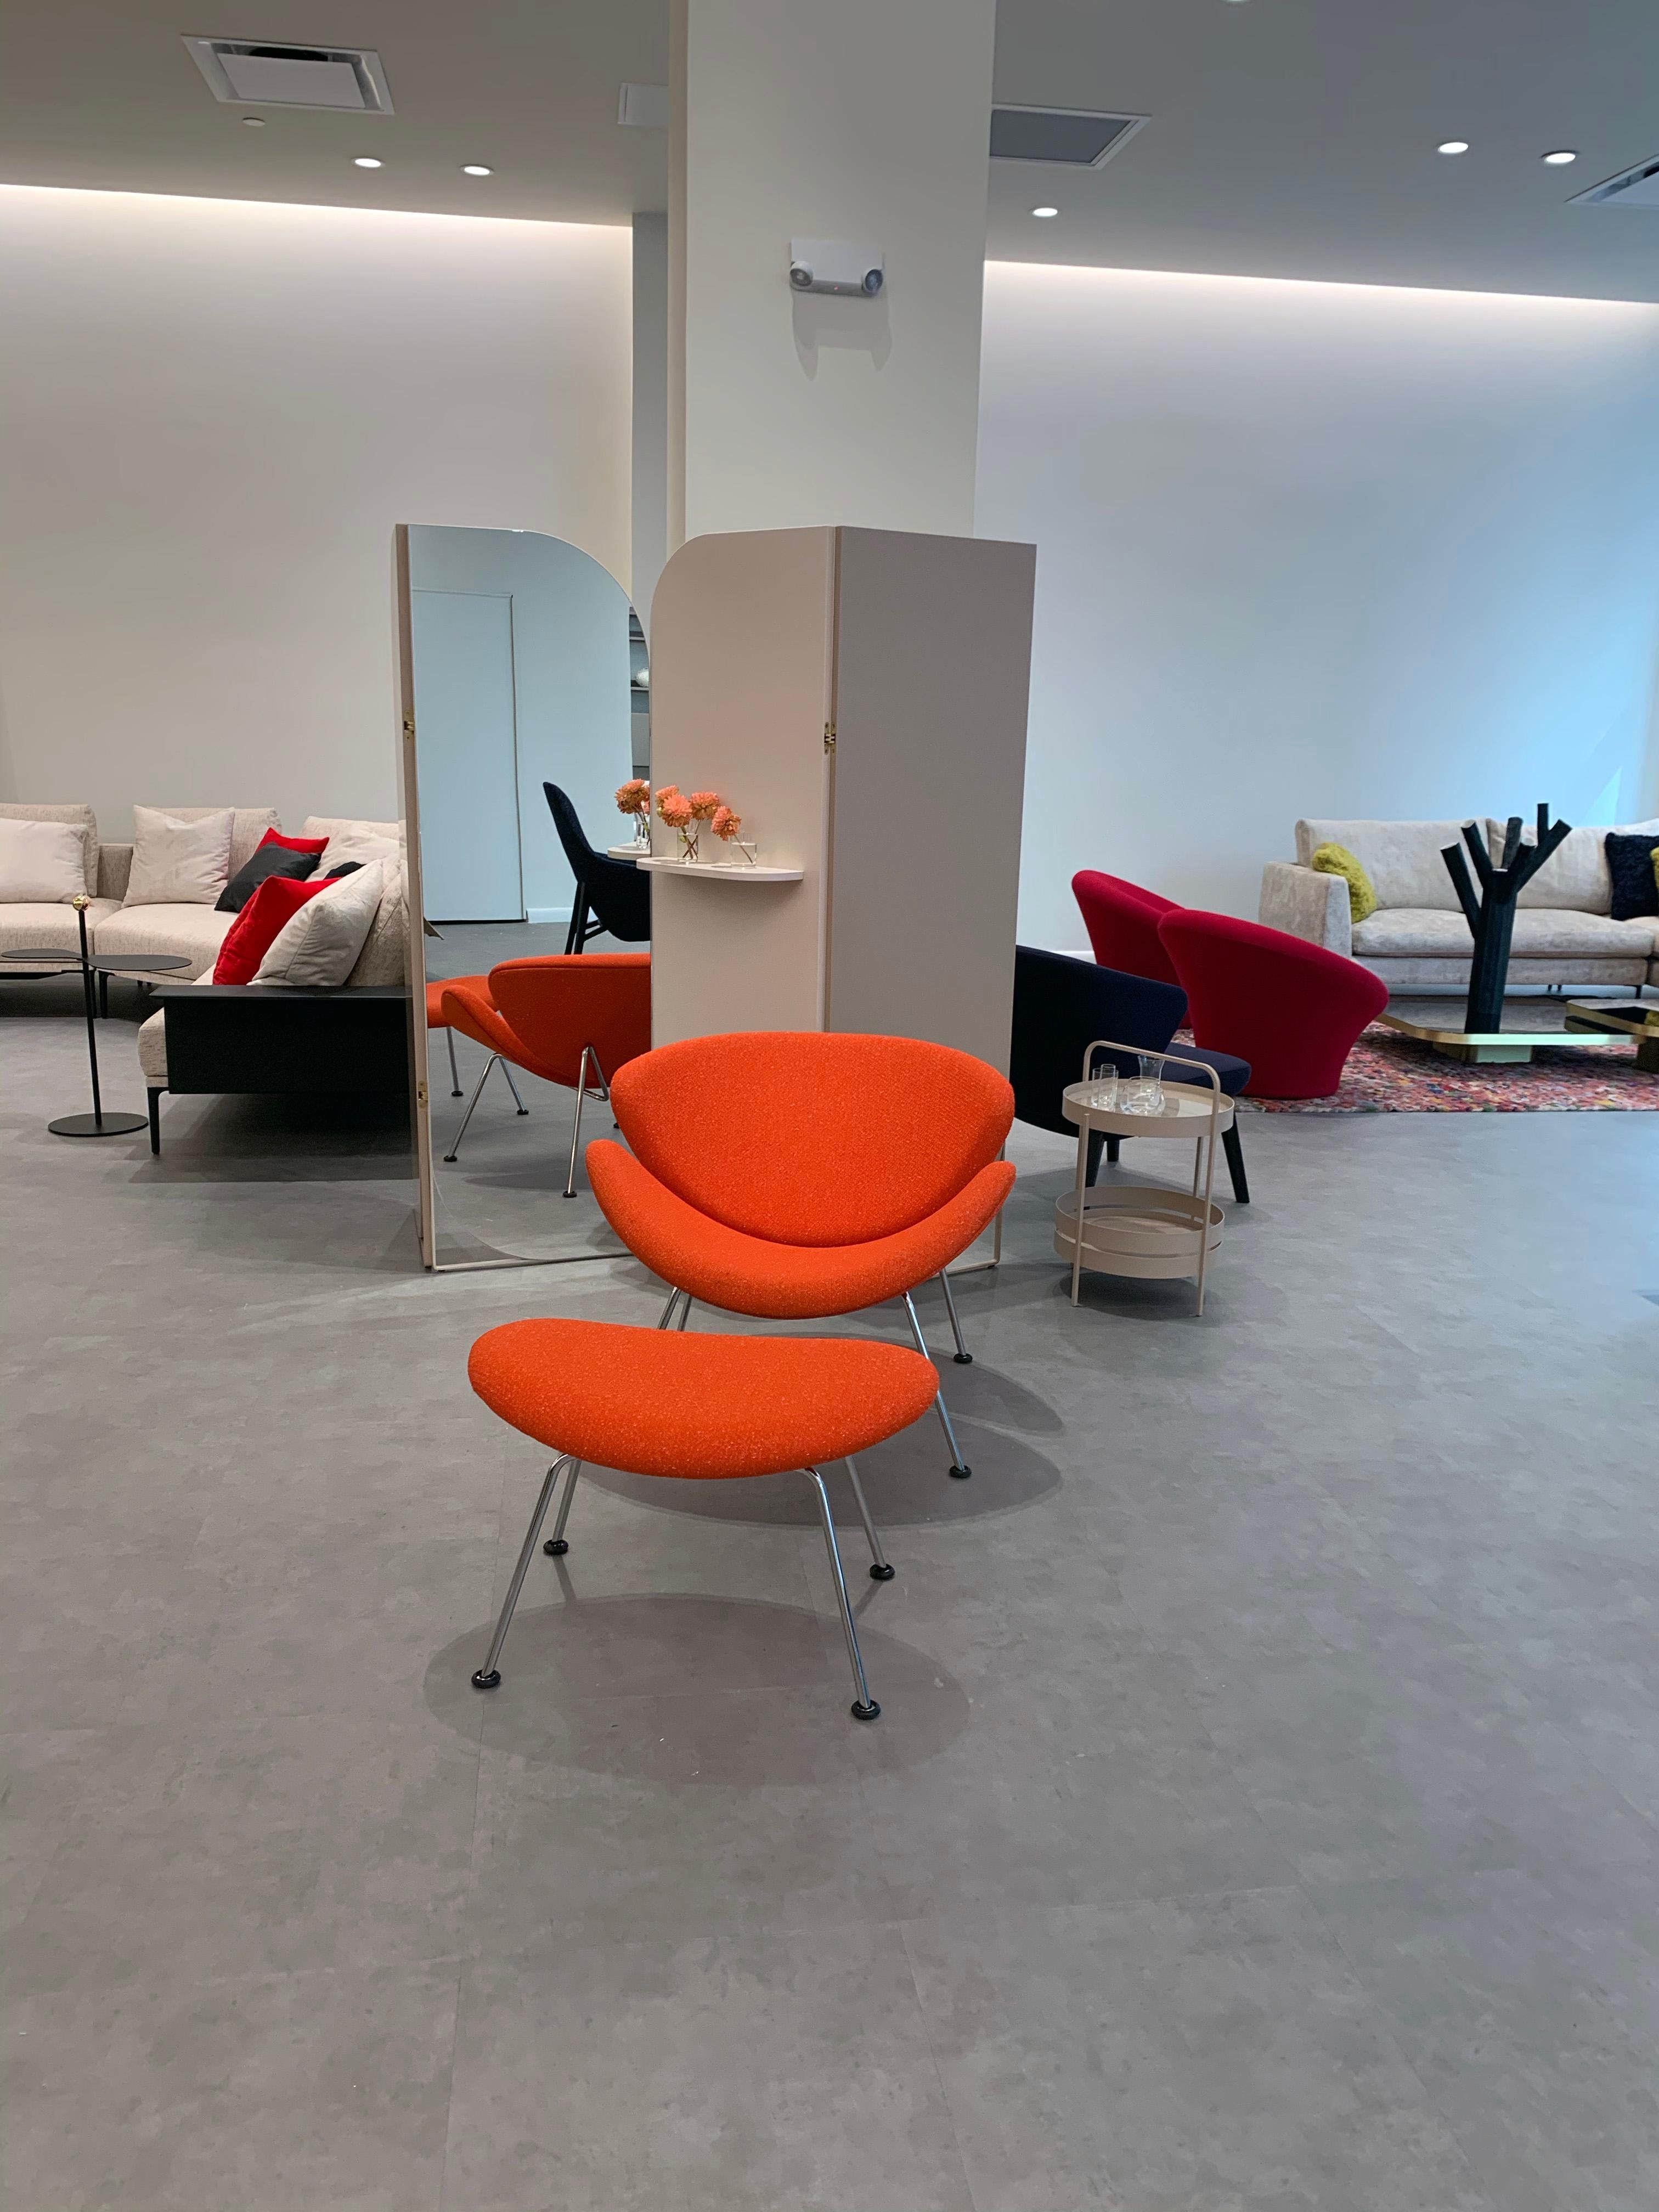 Orange lowchair
Pilot by Kvadrat #552 orange
Orange slice ottoman footstool
Pilot by Kvadrat #552
Ottoman chrome
The orange slice armchair by designer Pierre Paulin is one of the most popular design armchairs in the world. This iconic armchair